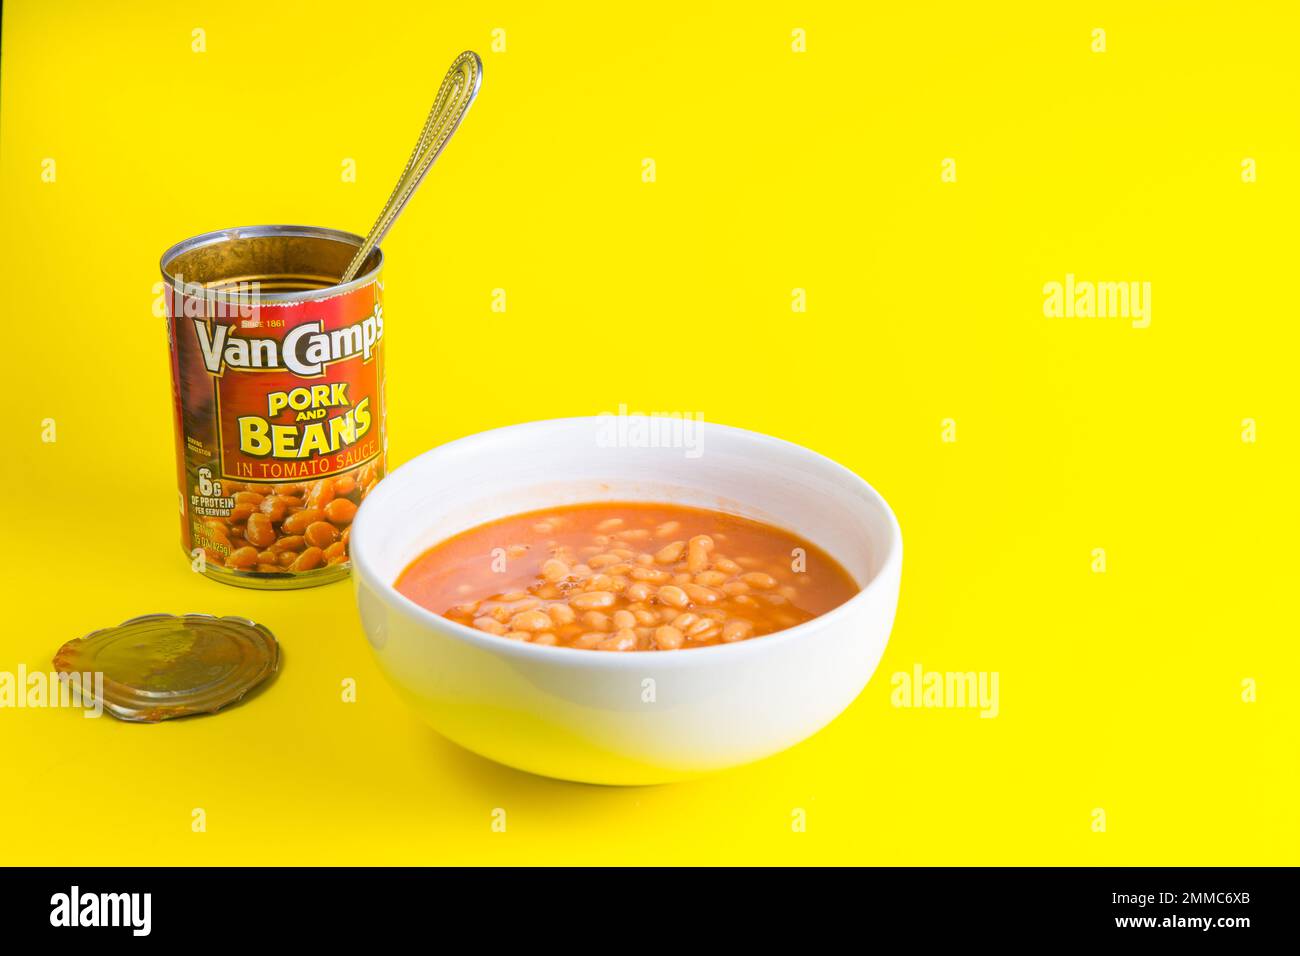 tin of Van Camps Pork and Beans Baked Beans stand out  on a yellow background in a white bowl Stock Photo